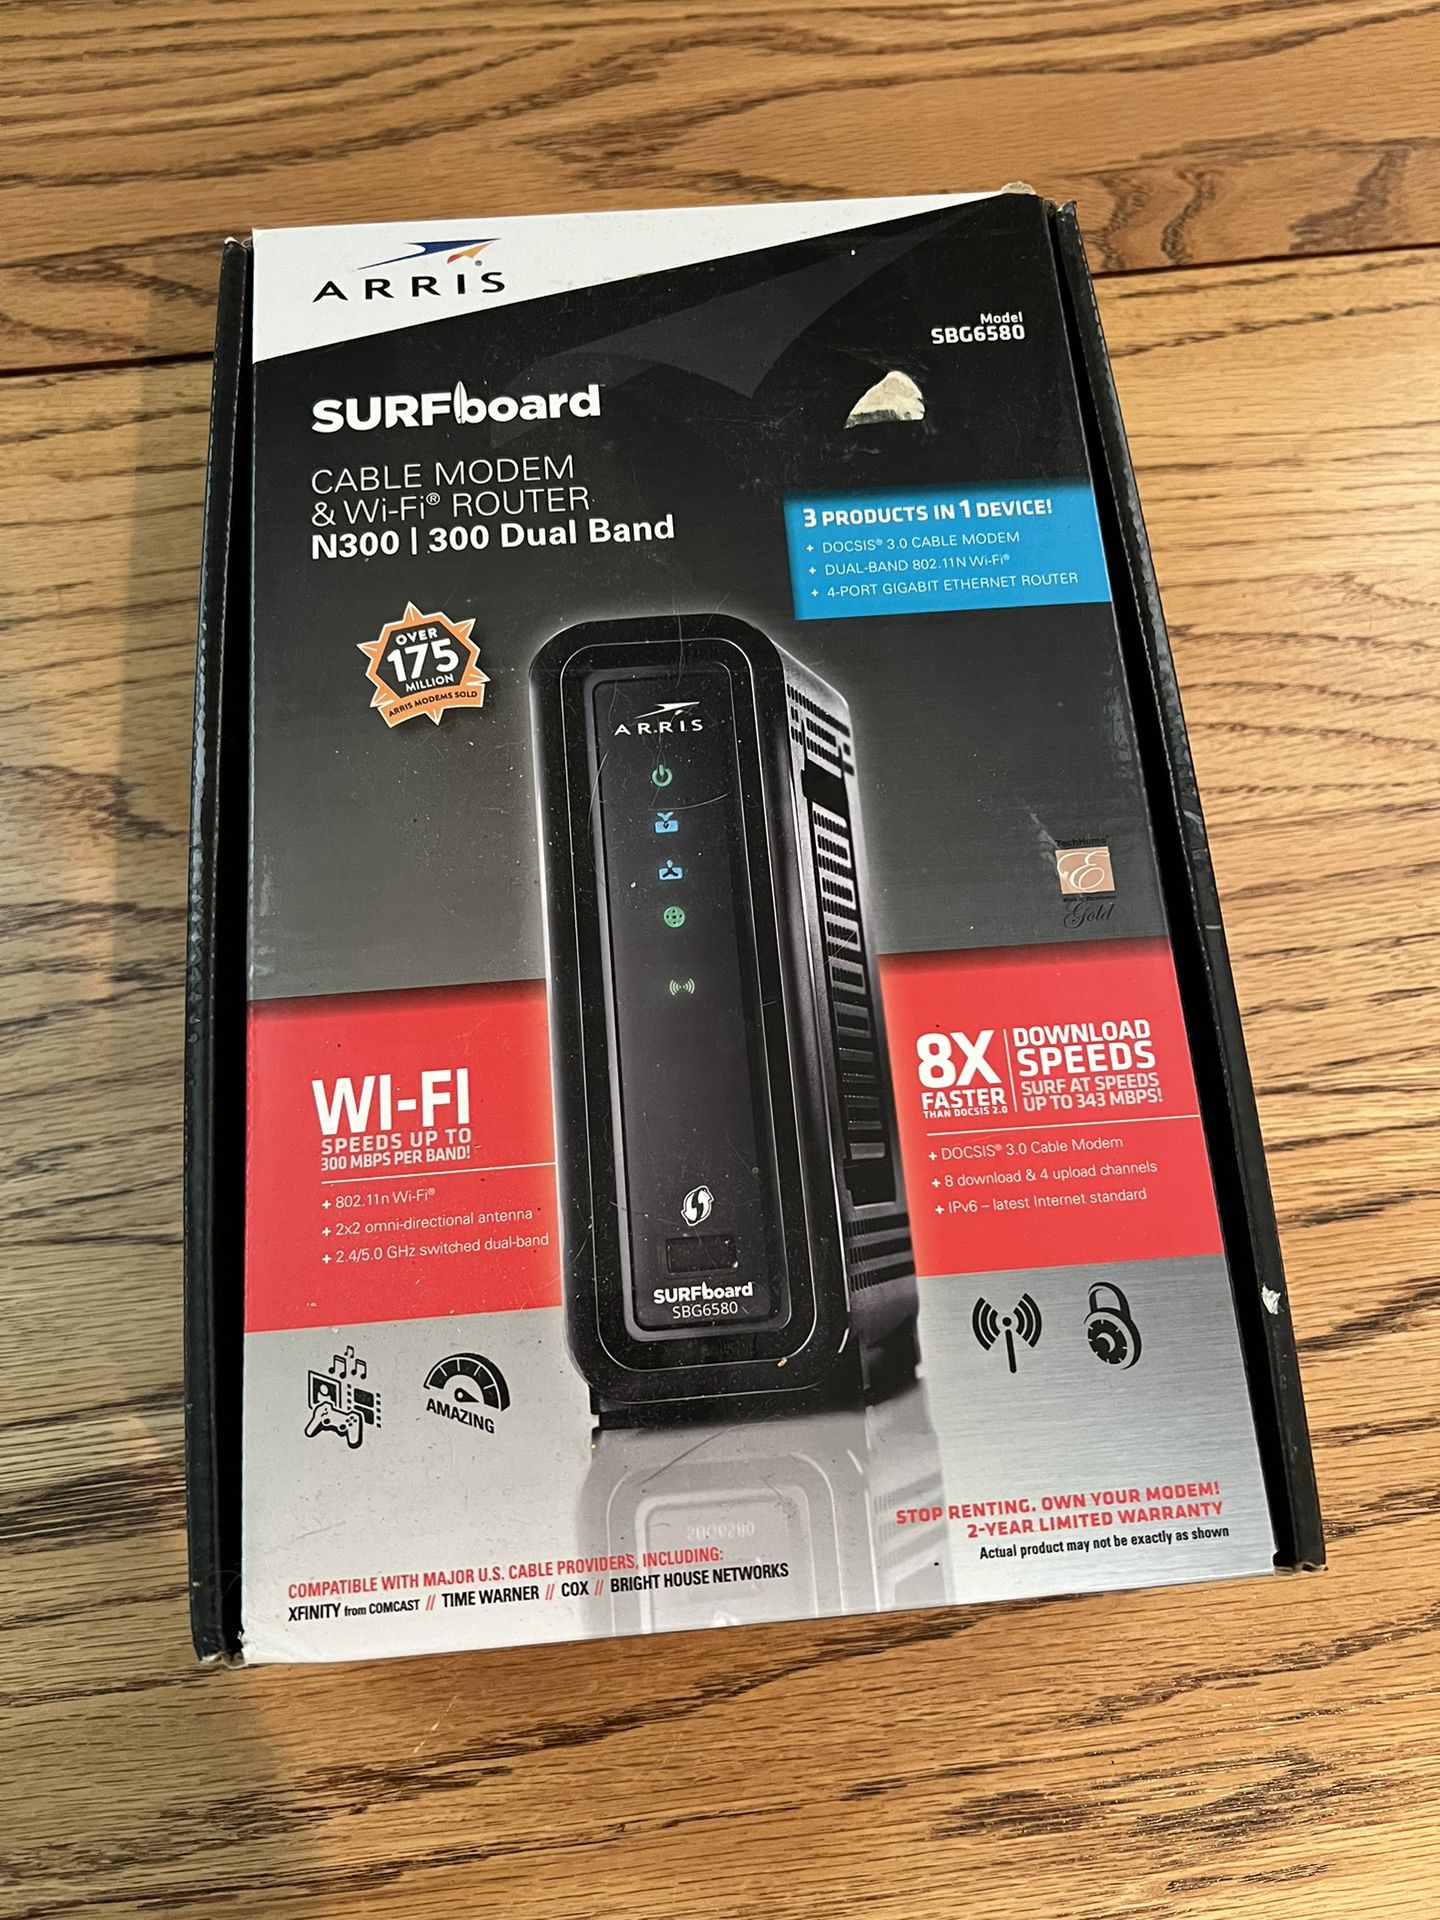 Arris Surfboard Cable Modem & WiFi Router - SBG6580